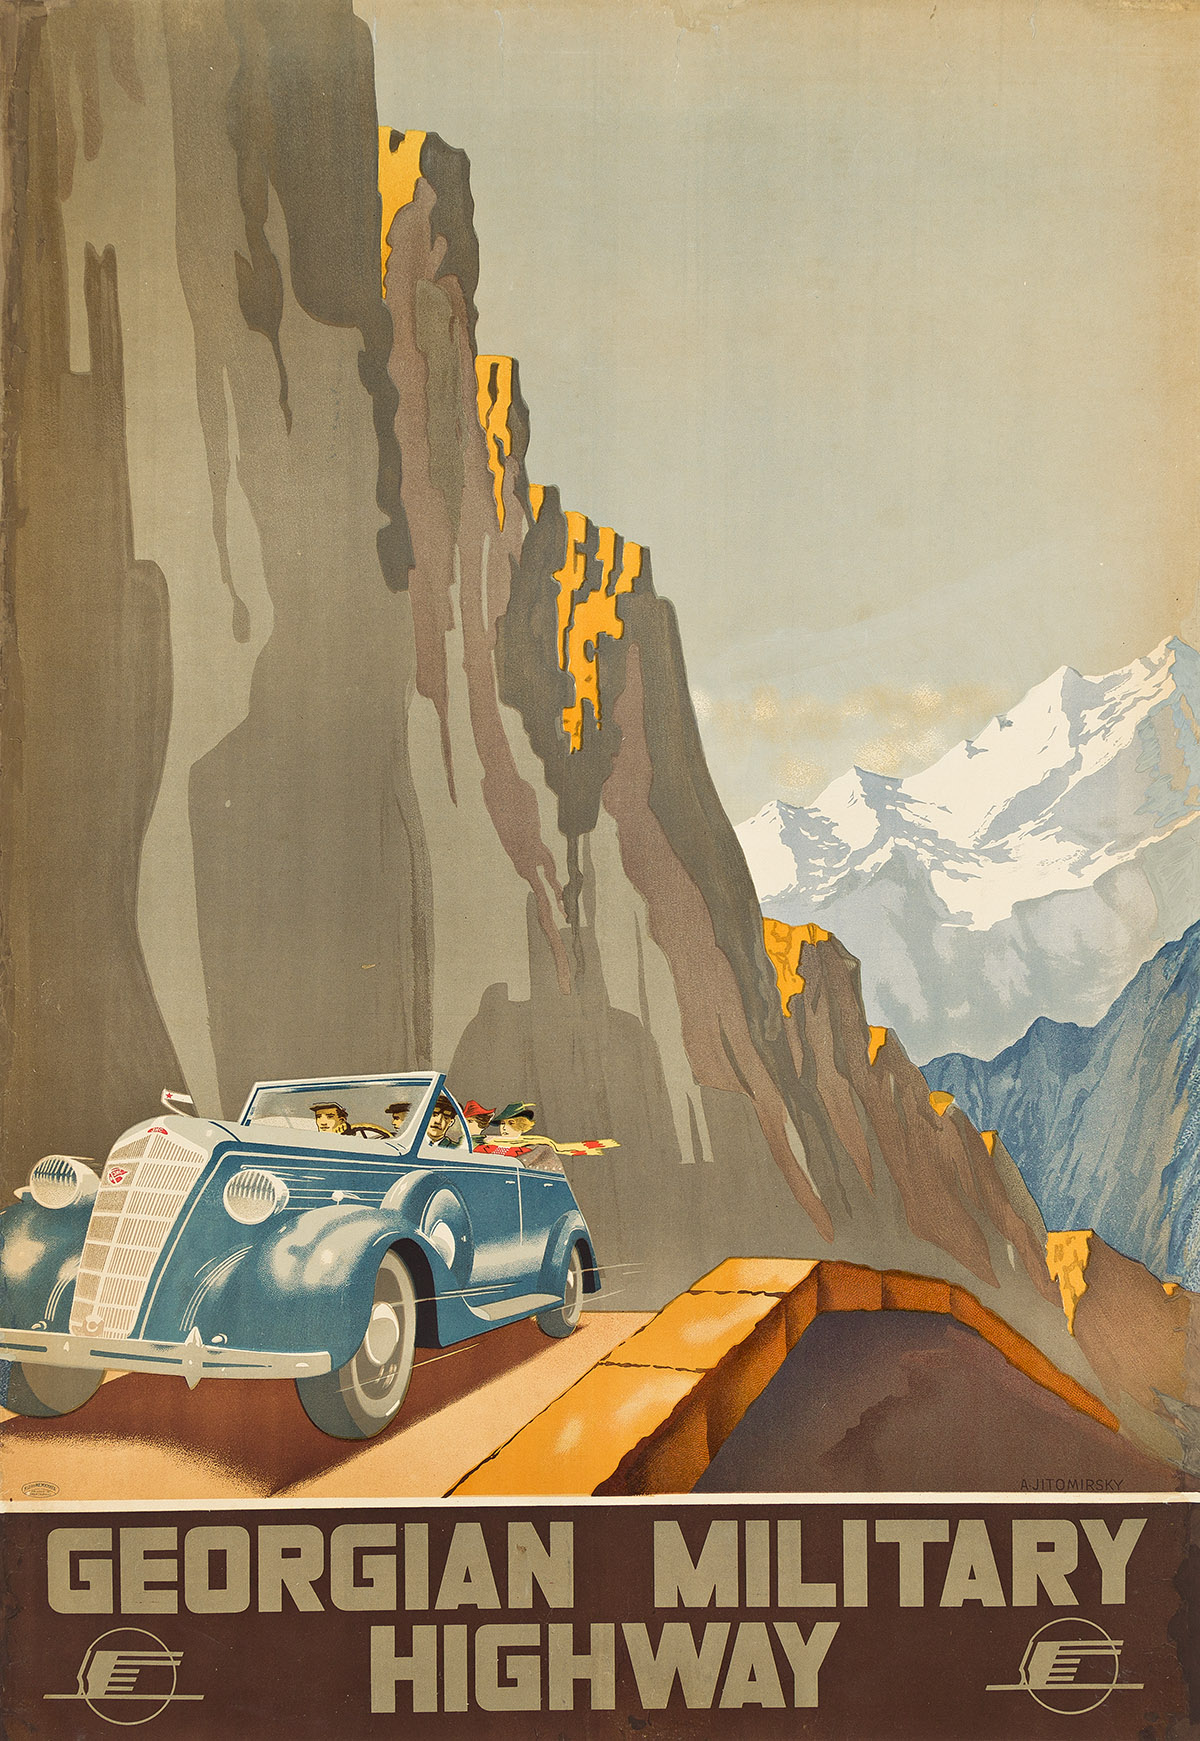 ALEXANDER ZHITOMIRSKY (1907-1993).  GEORGIAN MILITARY HIGHWAY. 1939. 39x27½ inches, 99x70 cm. Intourist, [USSR].